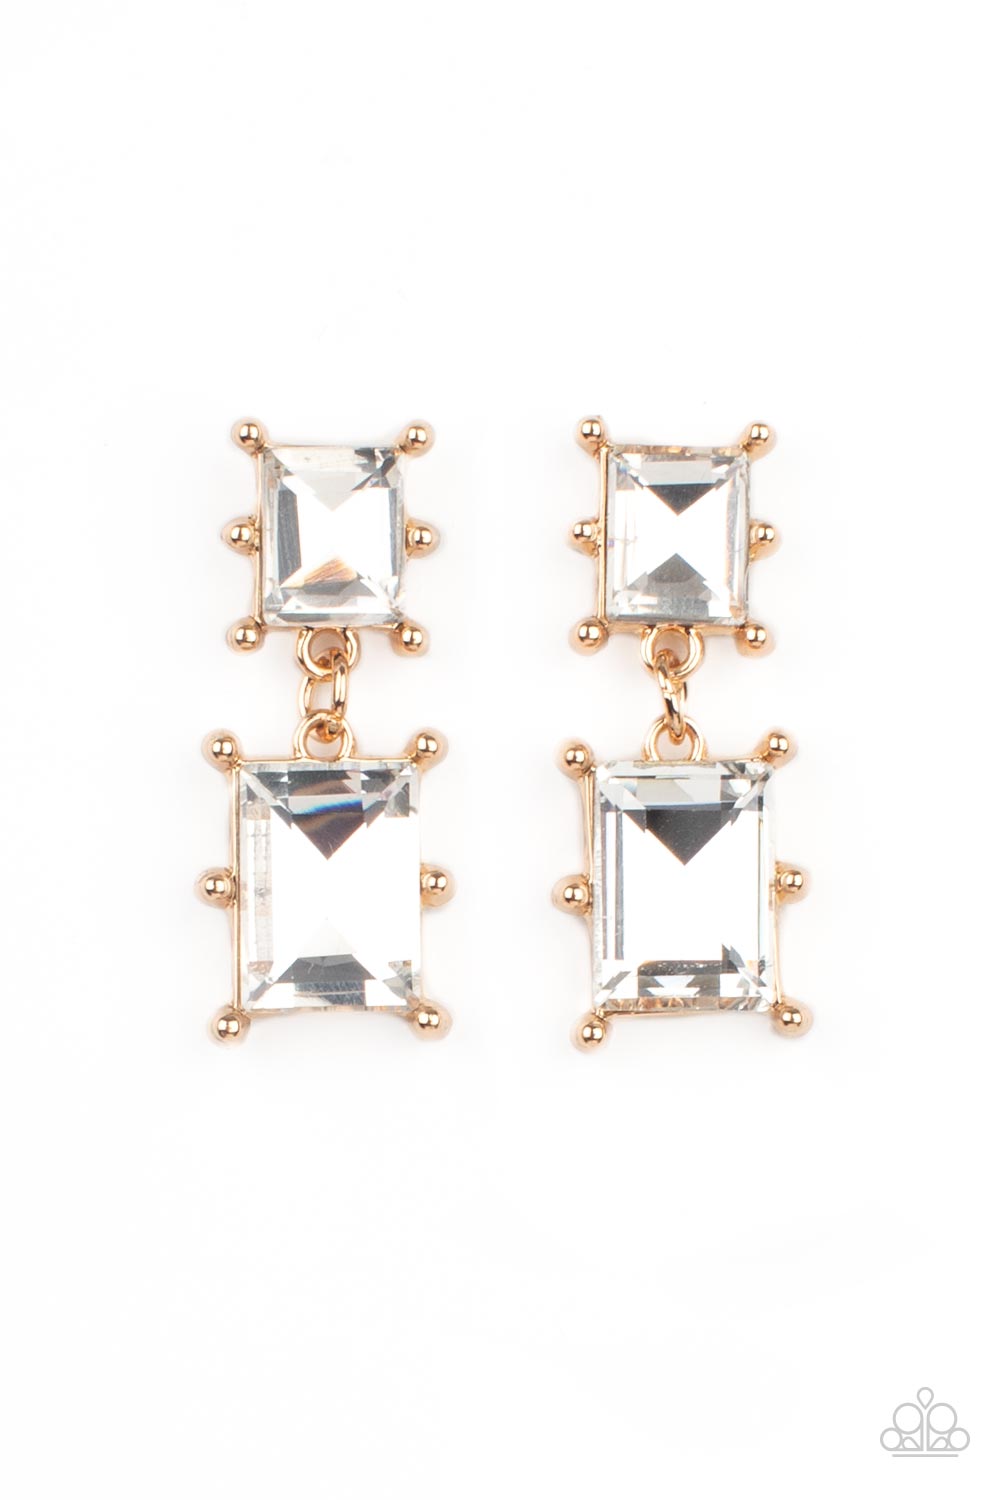 Cosmic Queen Gold &amp; White Rhinestone Earrings - Paparazzi Accessories- lightbox - CarasShop.com - $5 Jewelry by Cara Jewels